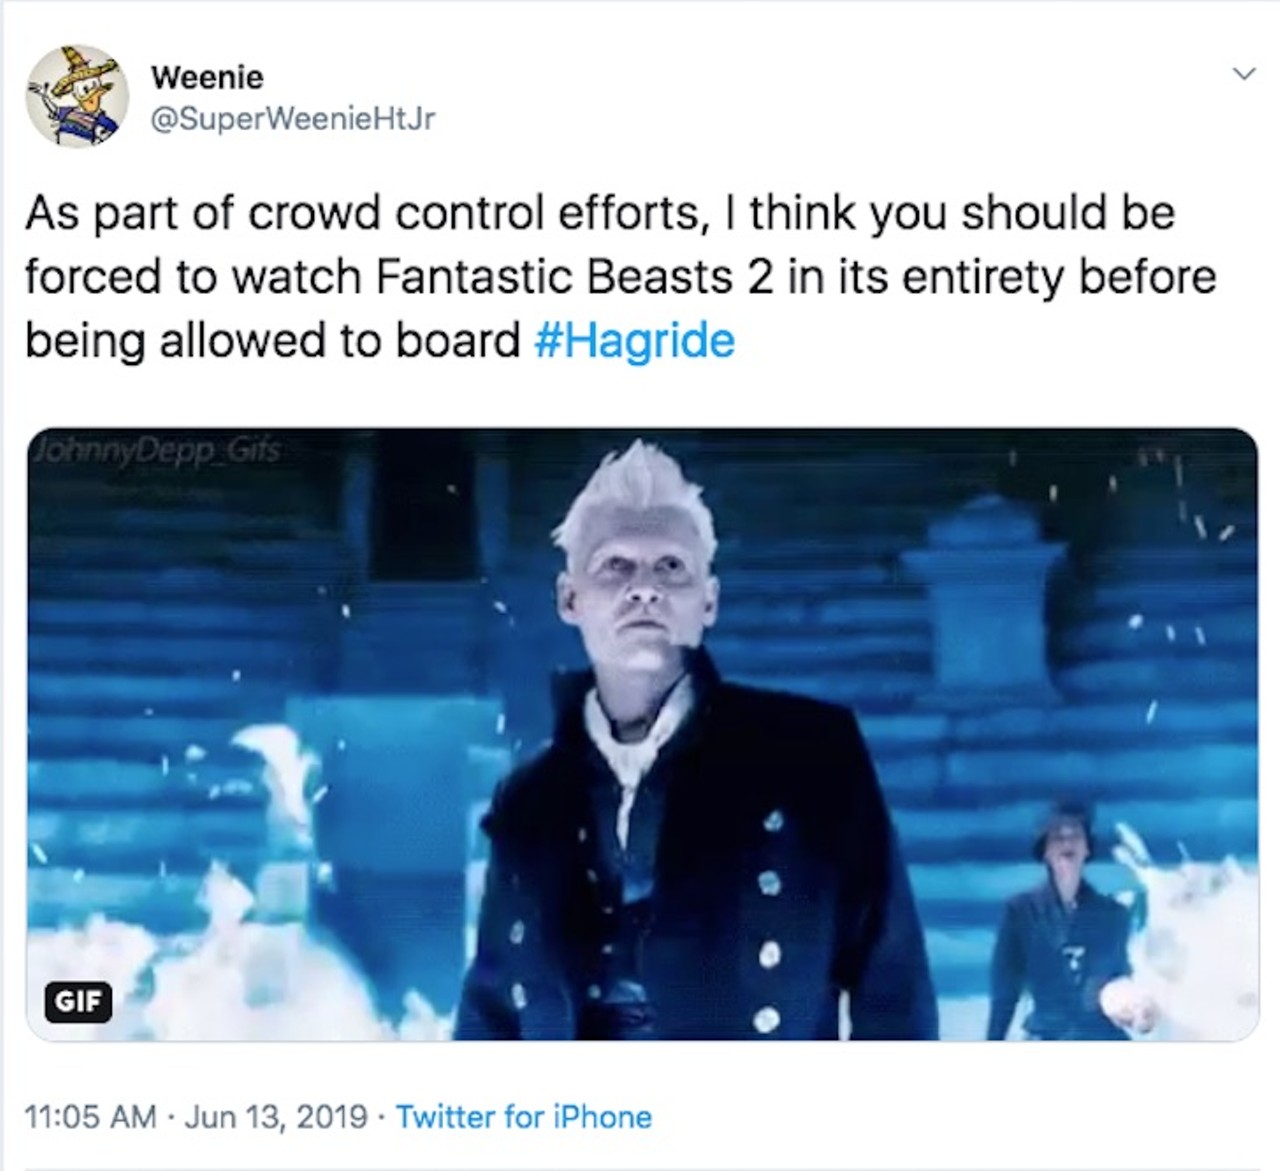 @SuperWeenieHtJr
"As part of crowd control efforts, I think you should be forced to watch Fantastic Beasts 2 in its entirety before being allowed to board #Hagride"